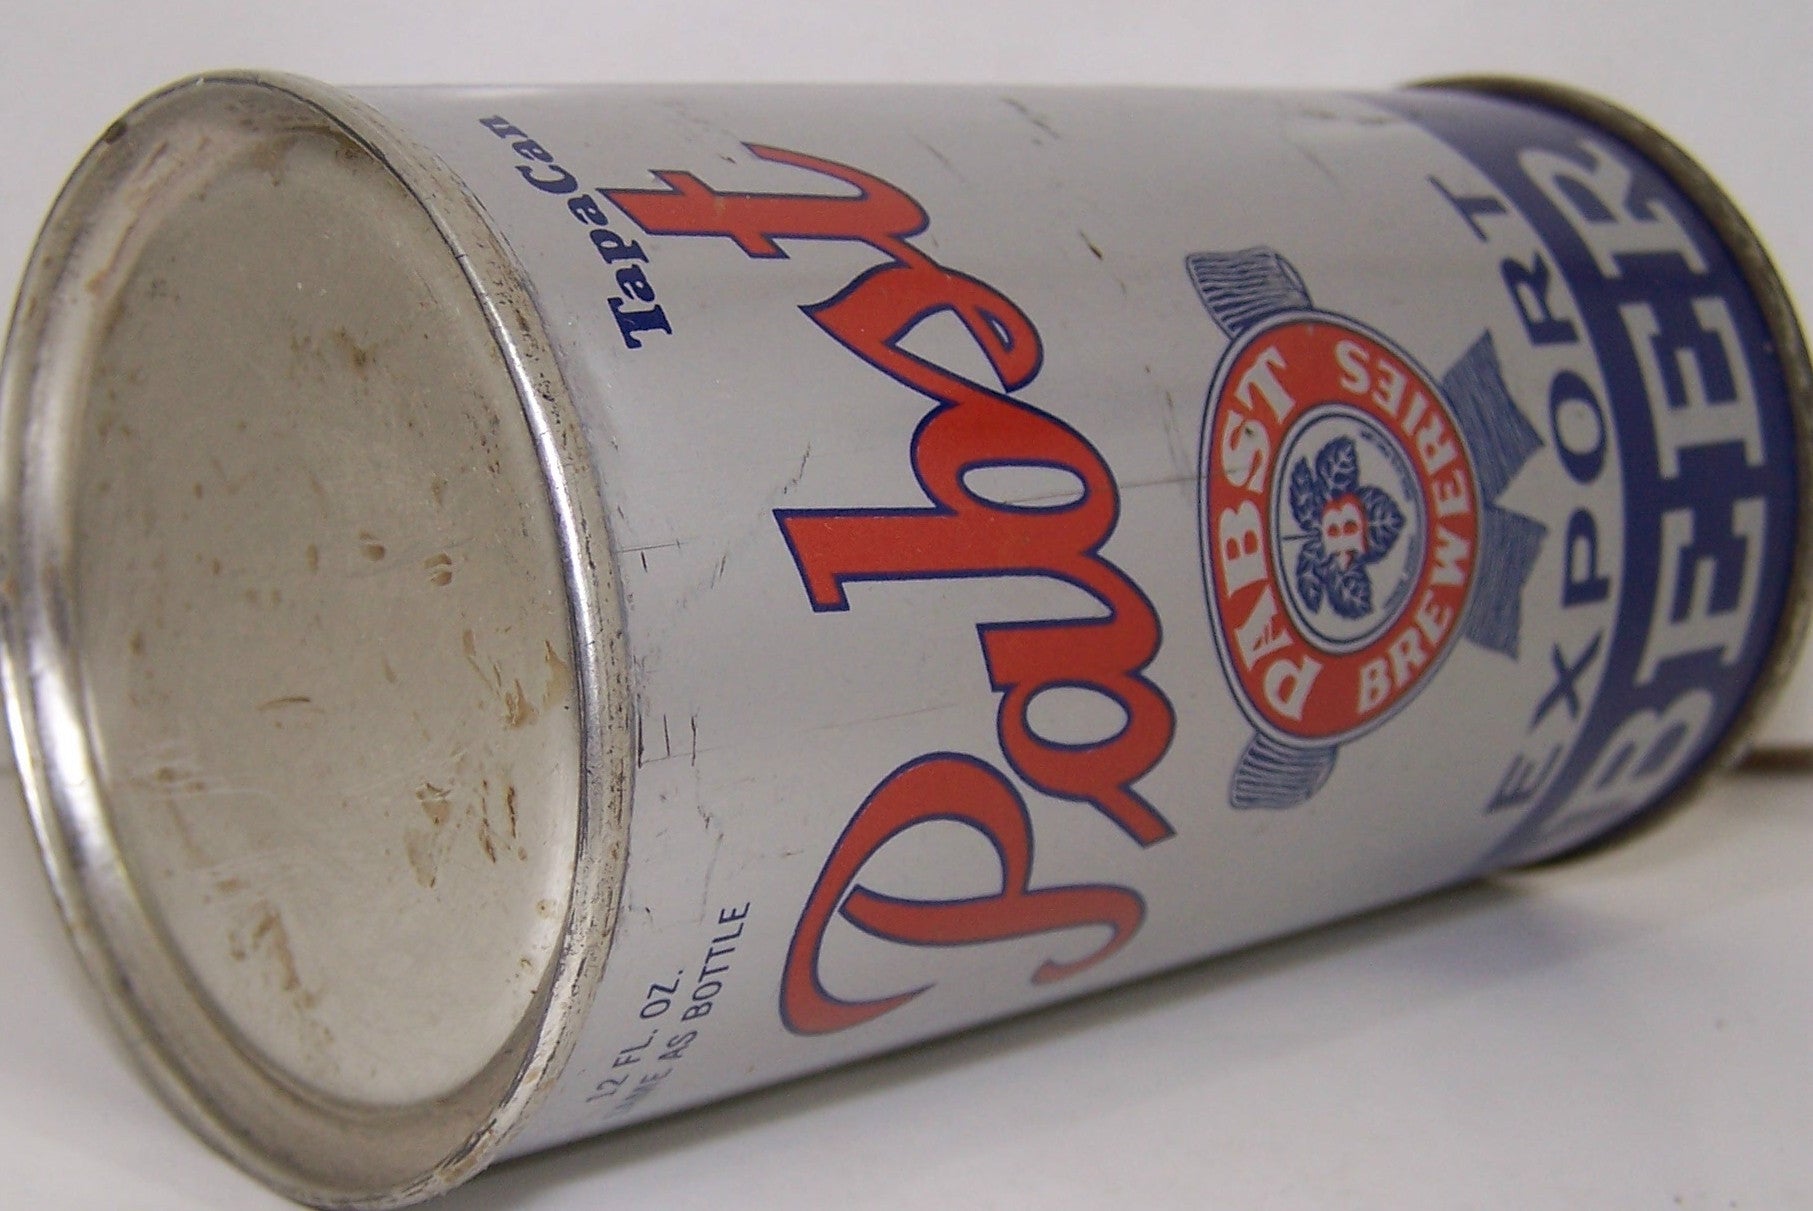 Pabst Export Beer, Lilek page # 651, Grade 1/1- Sold on 4/8/15